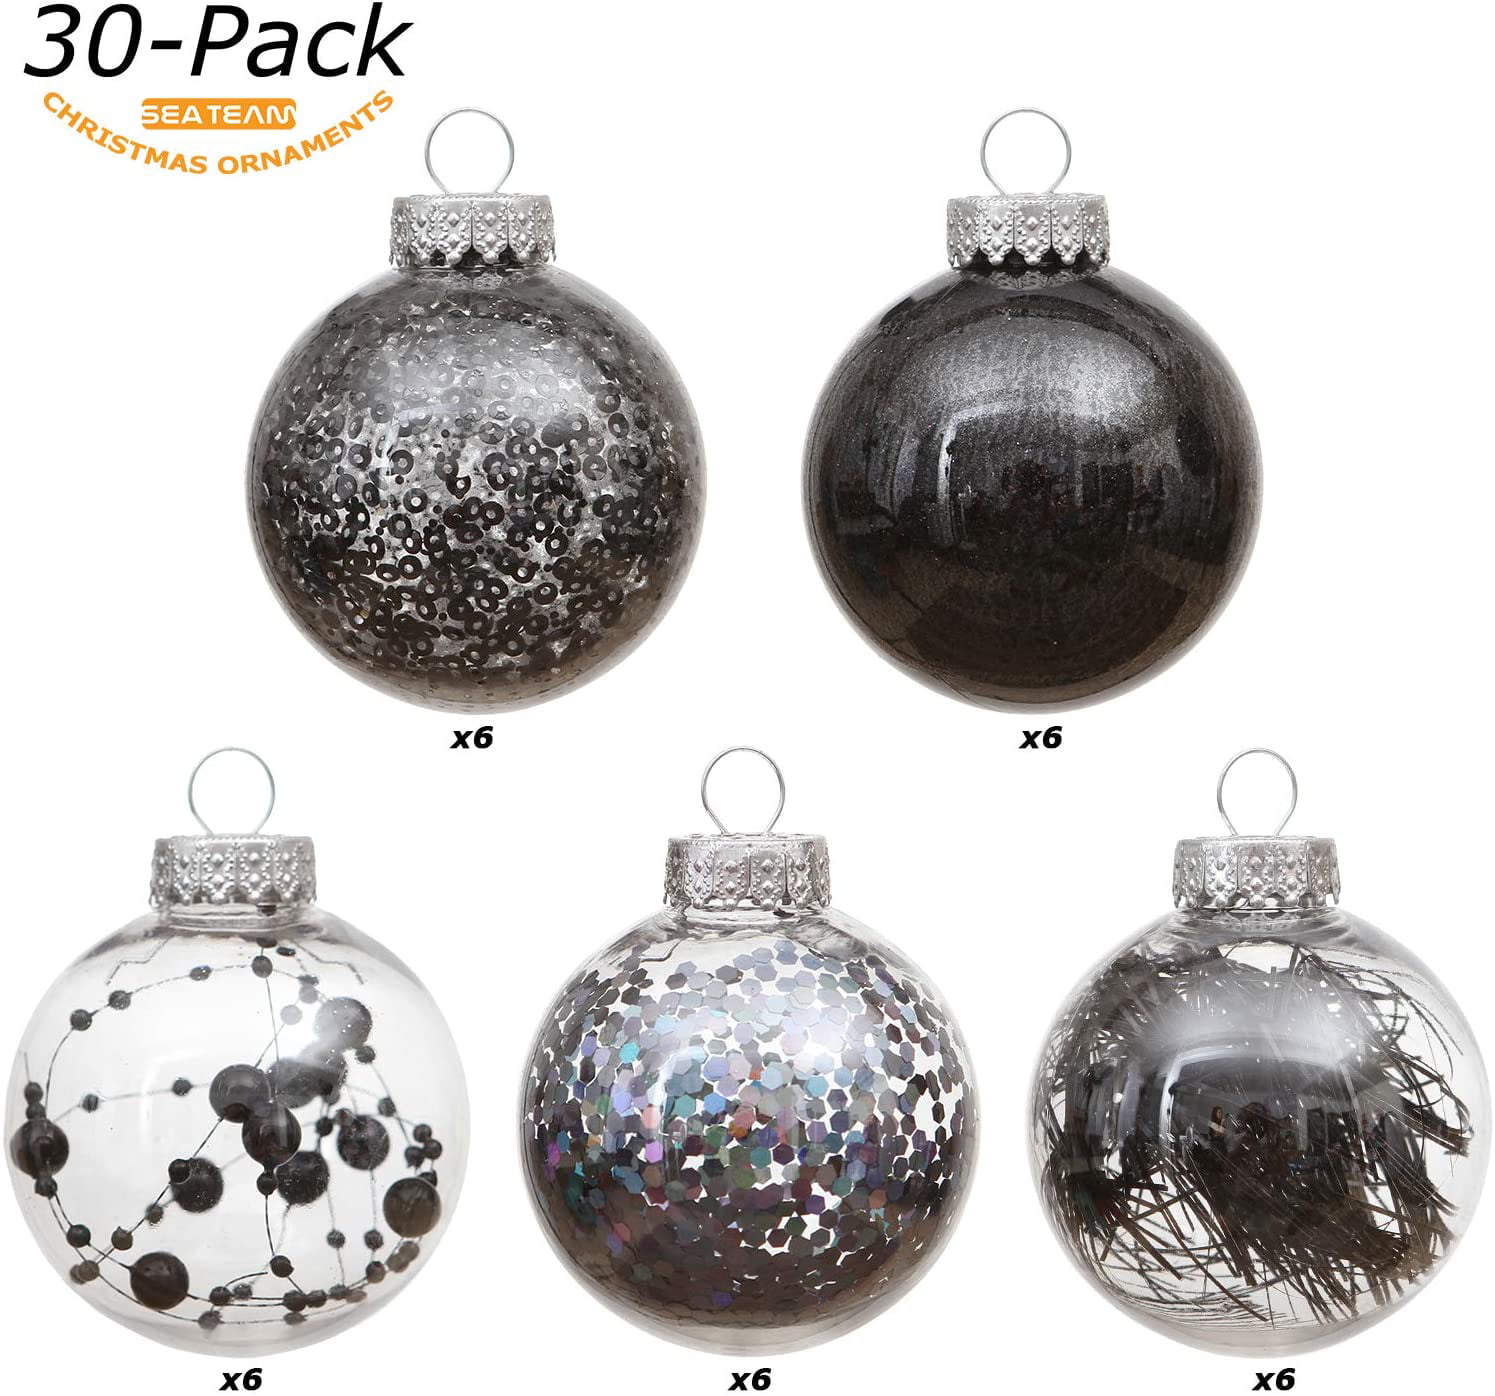 Sea Team 60mm/2.36 Shatterproof Clear Plastic Christmas Ball Ornaments Decorative Xmas Balls Baubles Set with Stuffed Delicate Decorations 30 Counts, Babyblue